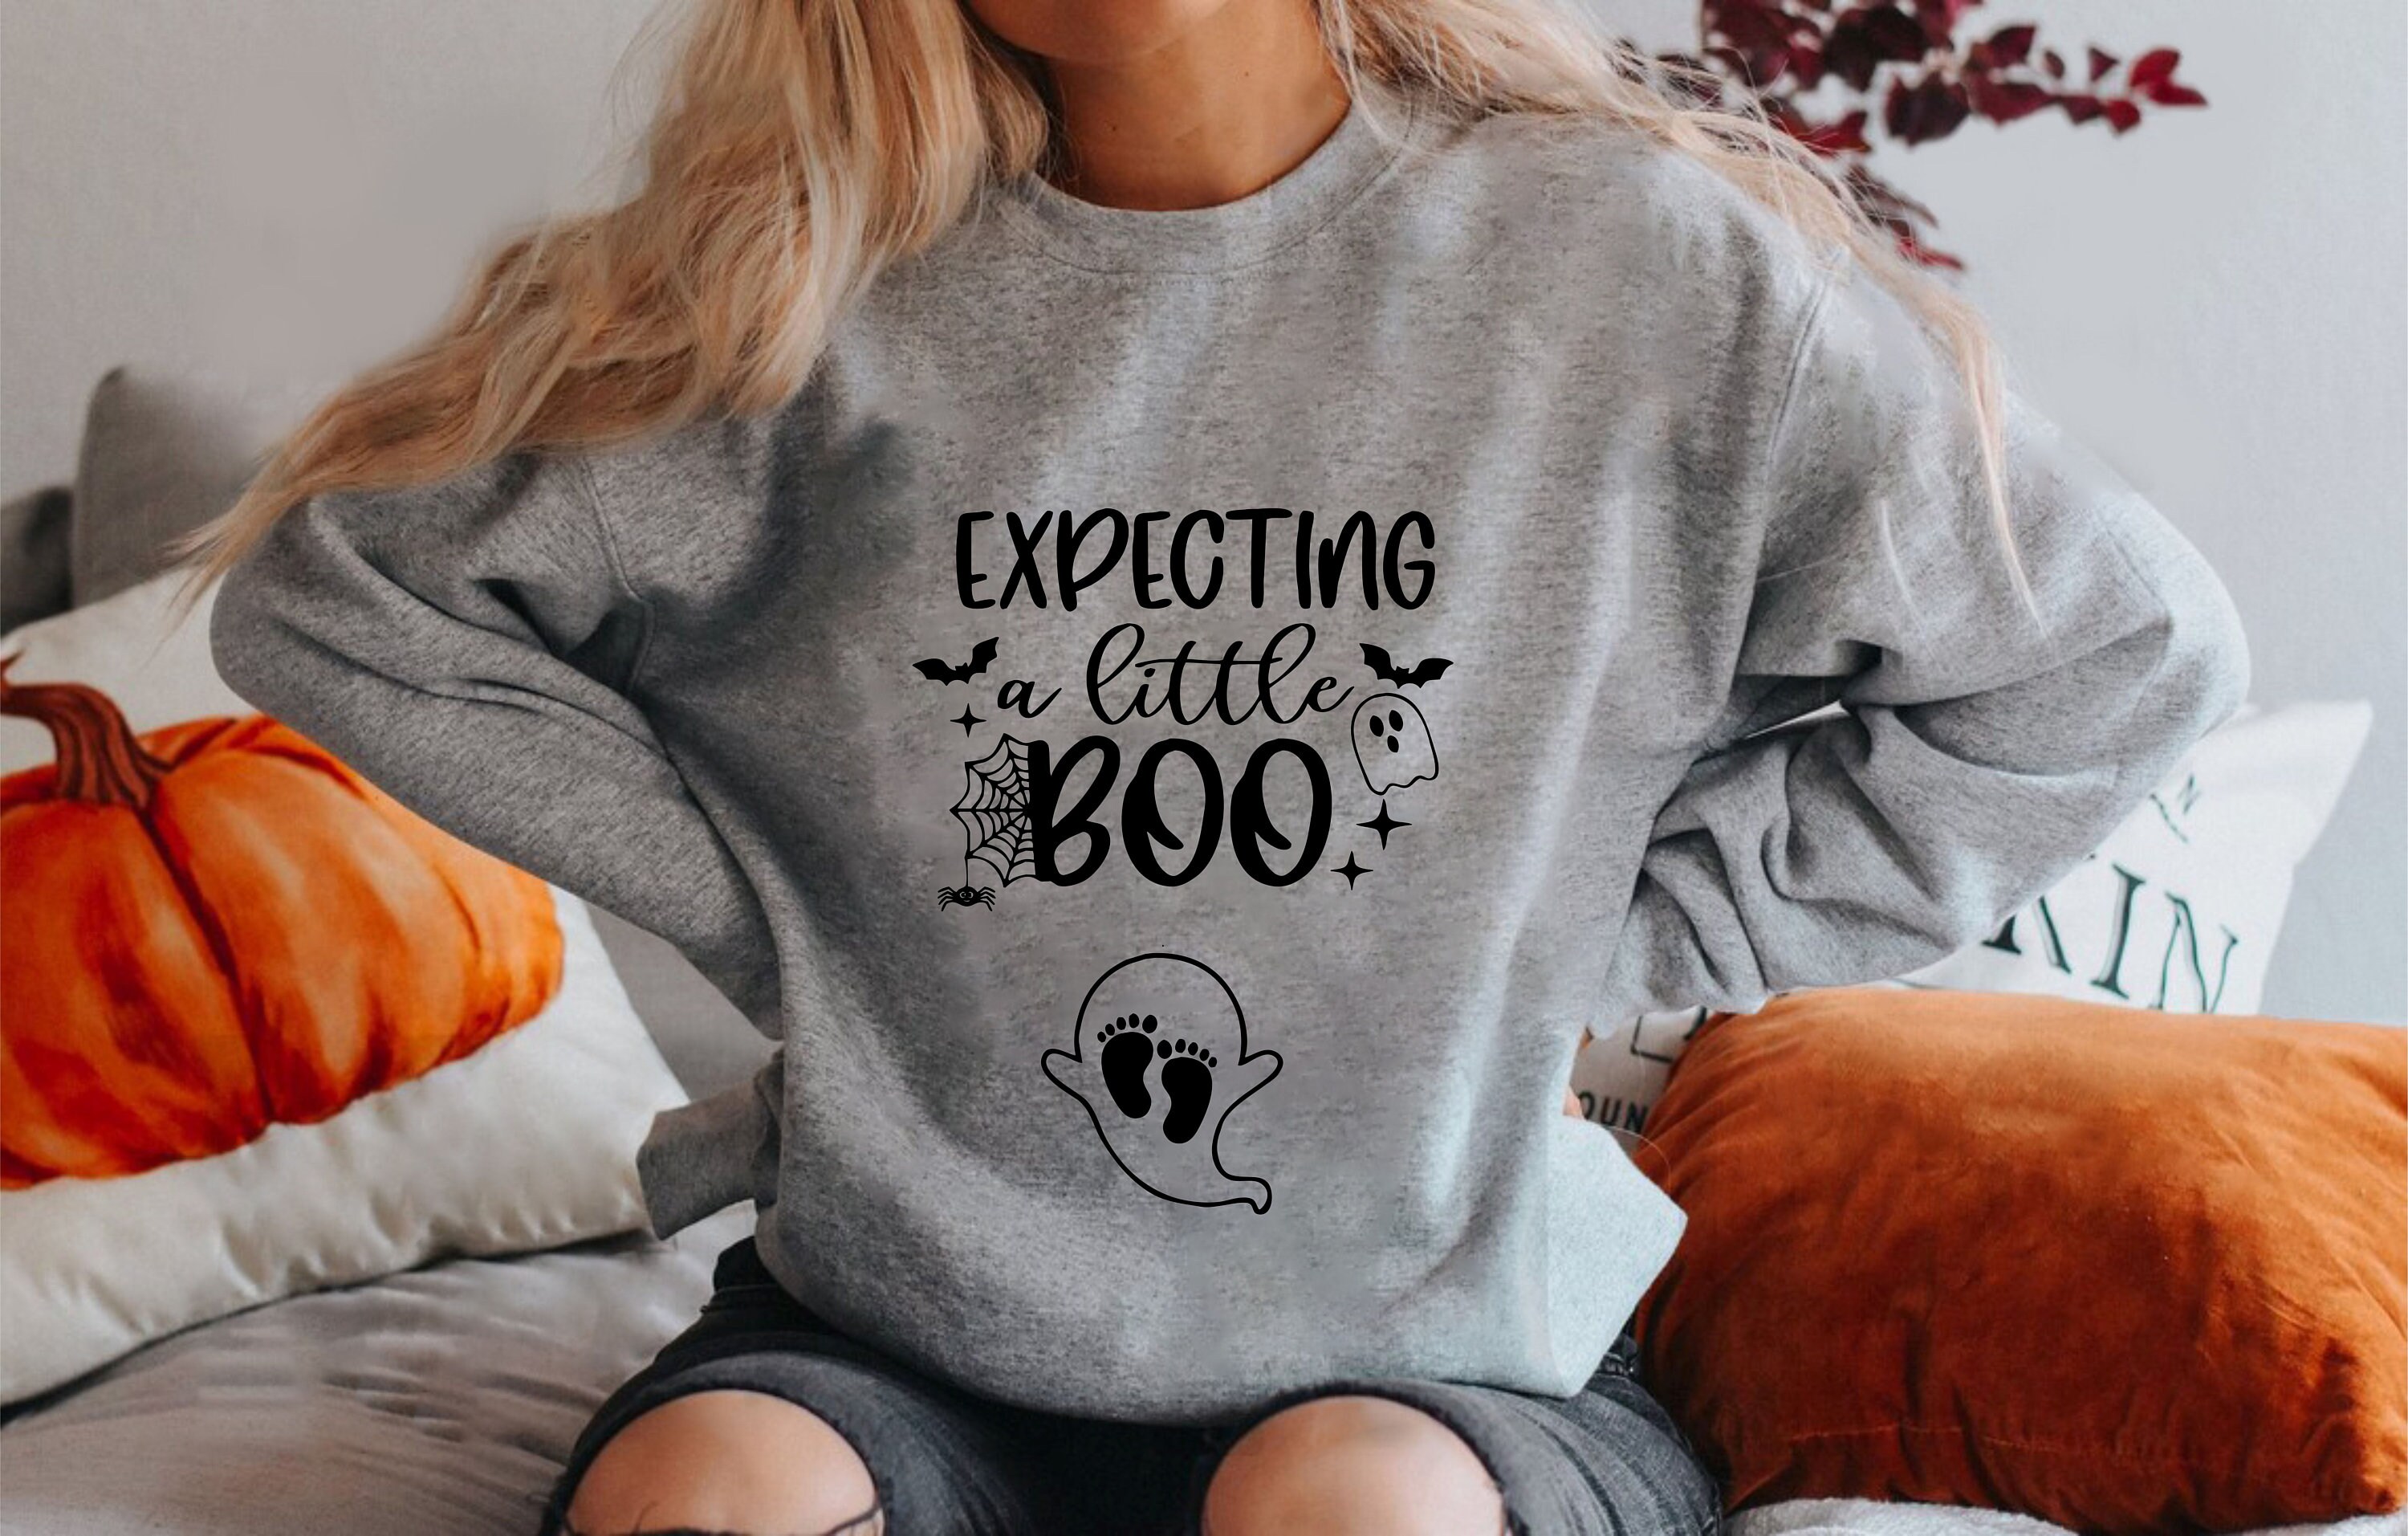 Discover Expecting A Little Boo Sweatshirt, Pregnant Woman Shirt, Pregnancy In October, Spooky Baby Coming, Pregnancy Halloween Sweater, Baby Reveal